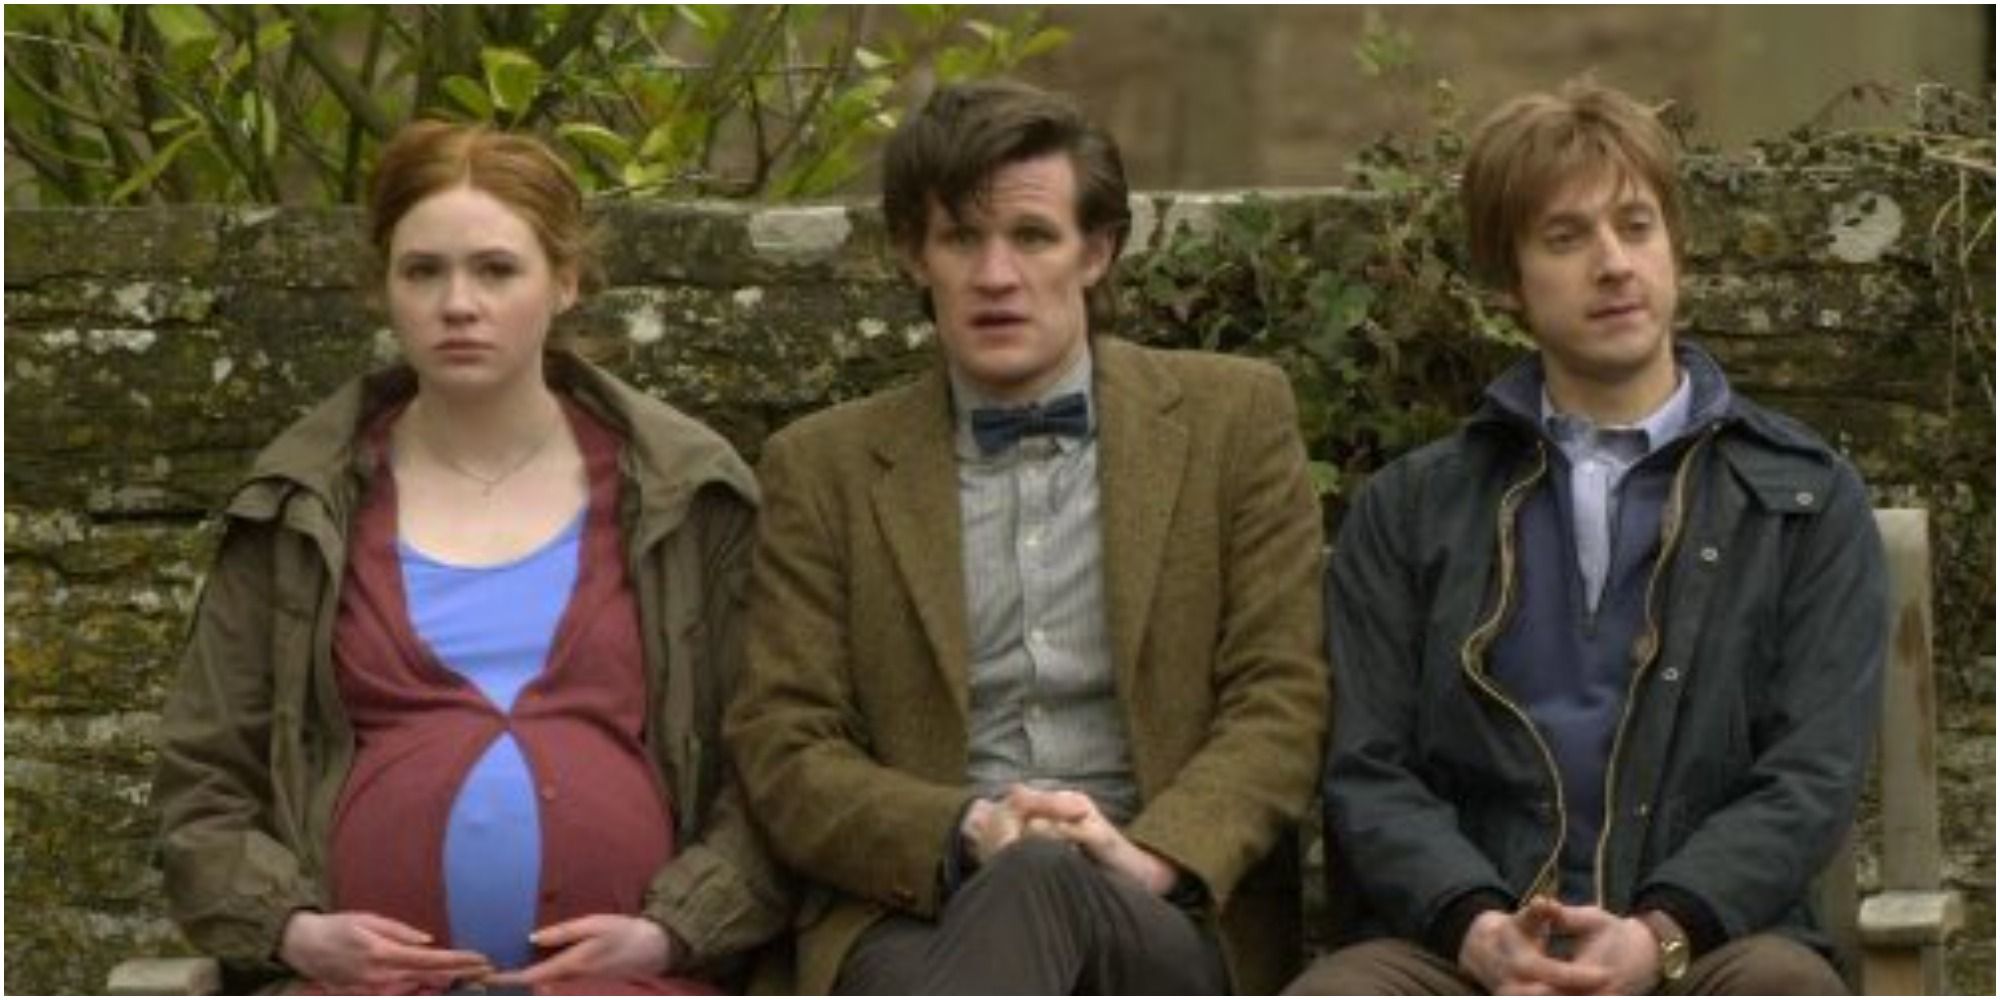 The Eleventh Doctor and the Ponds sit on a bench in Doctor Who. Amy is pregnant.